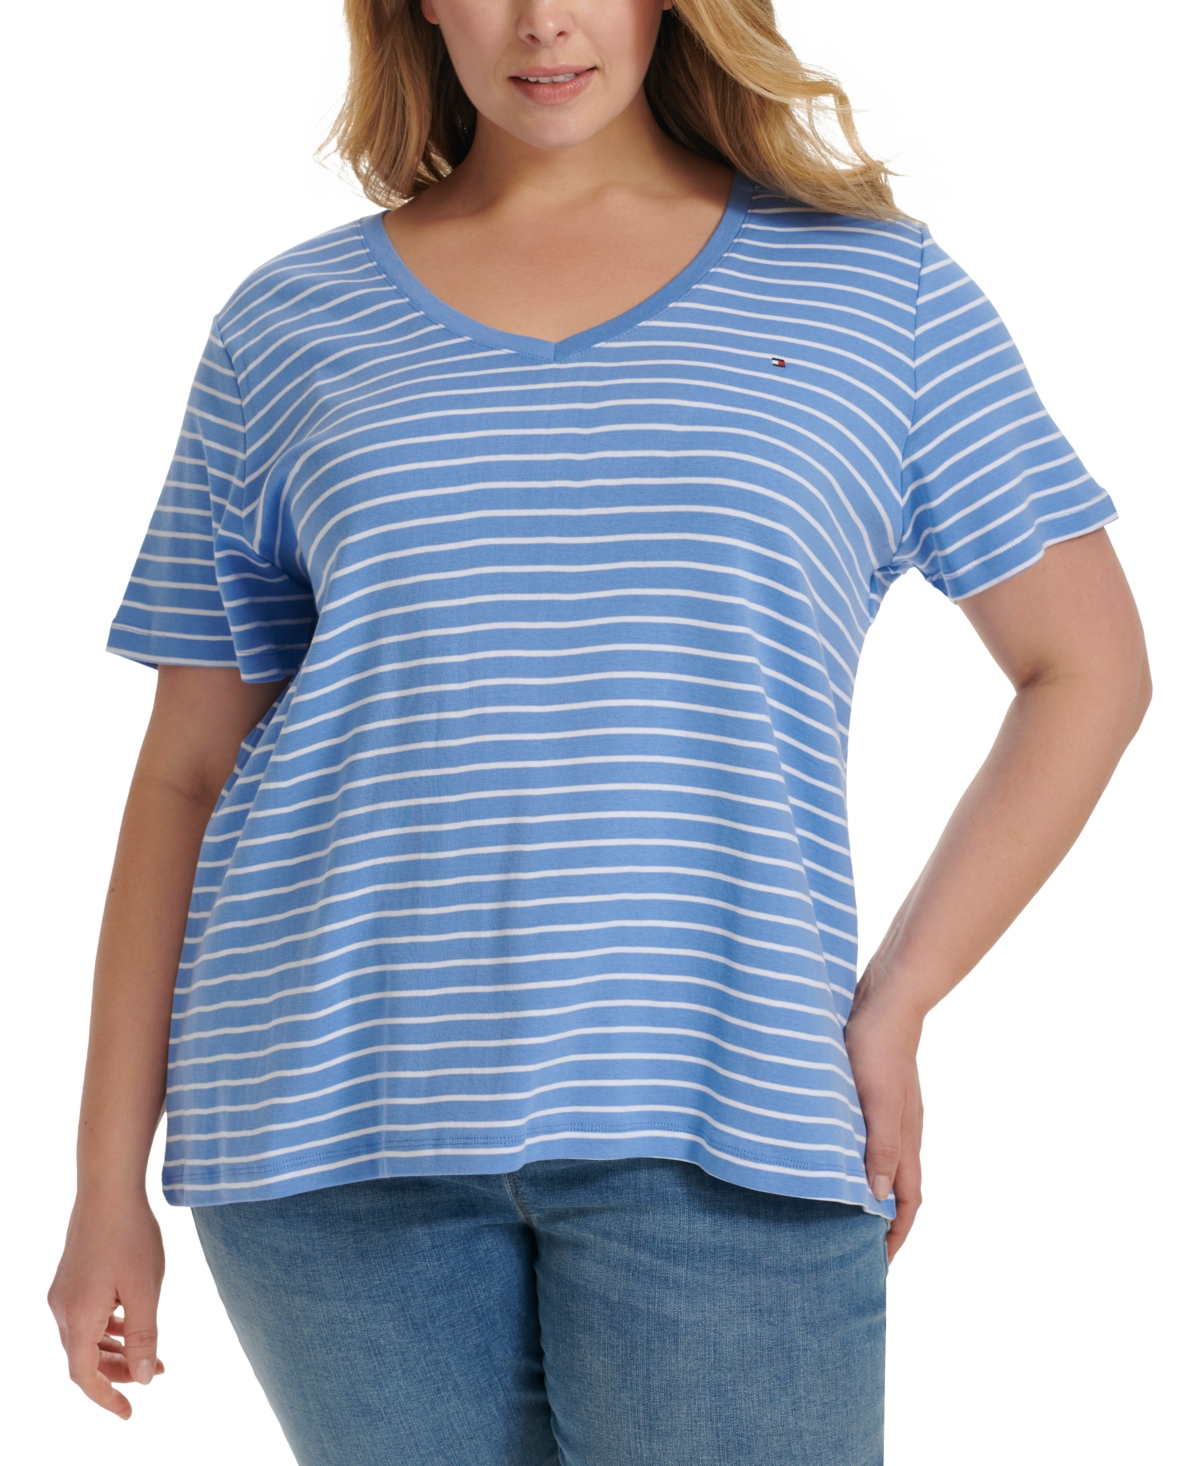 Plus Size Cotton Striped T-Shirt, Created for Macy's - Bay Combo